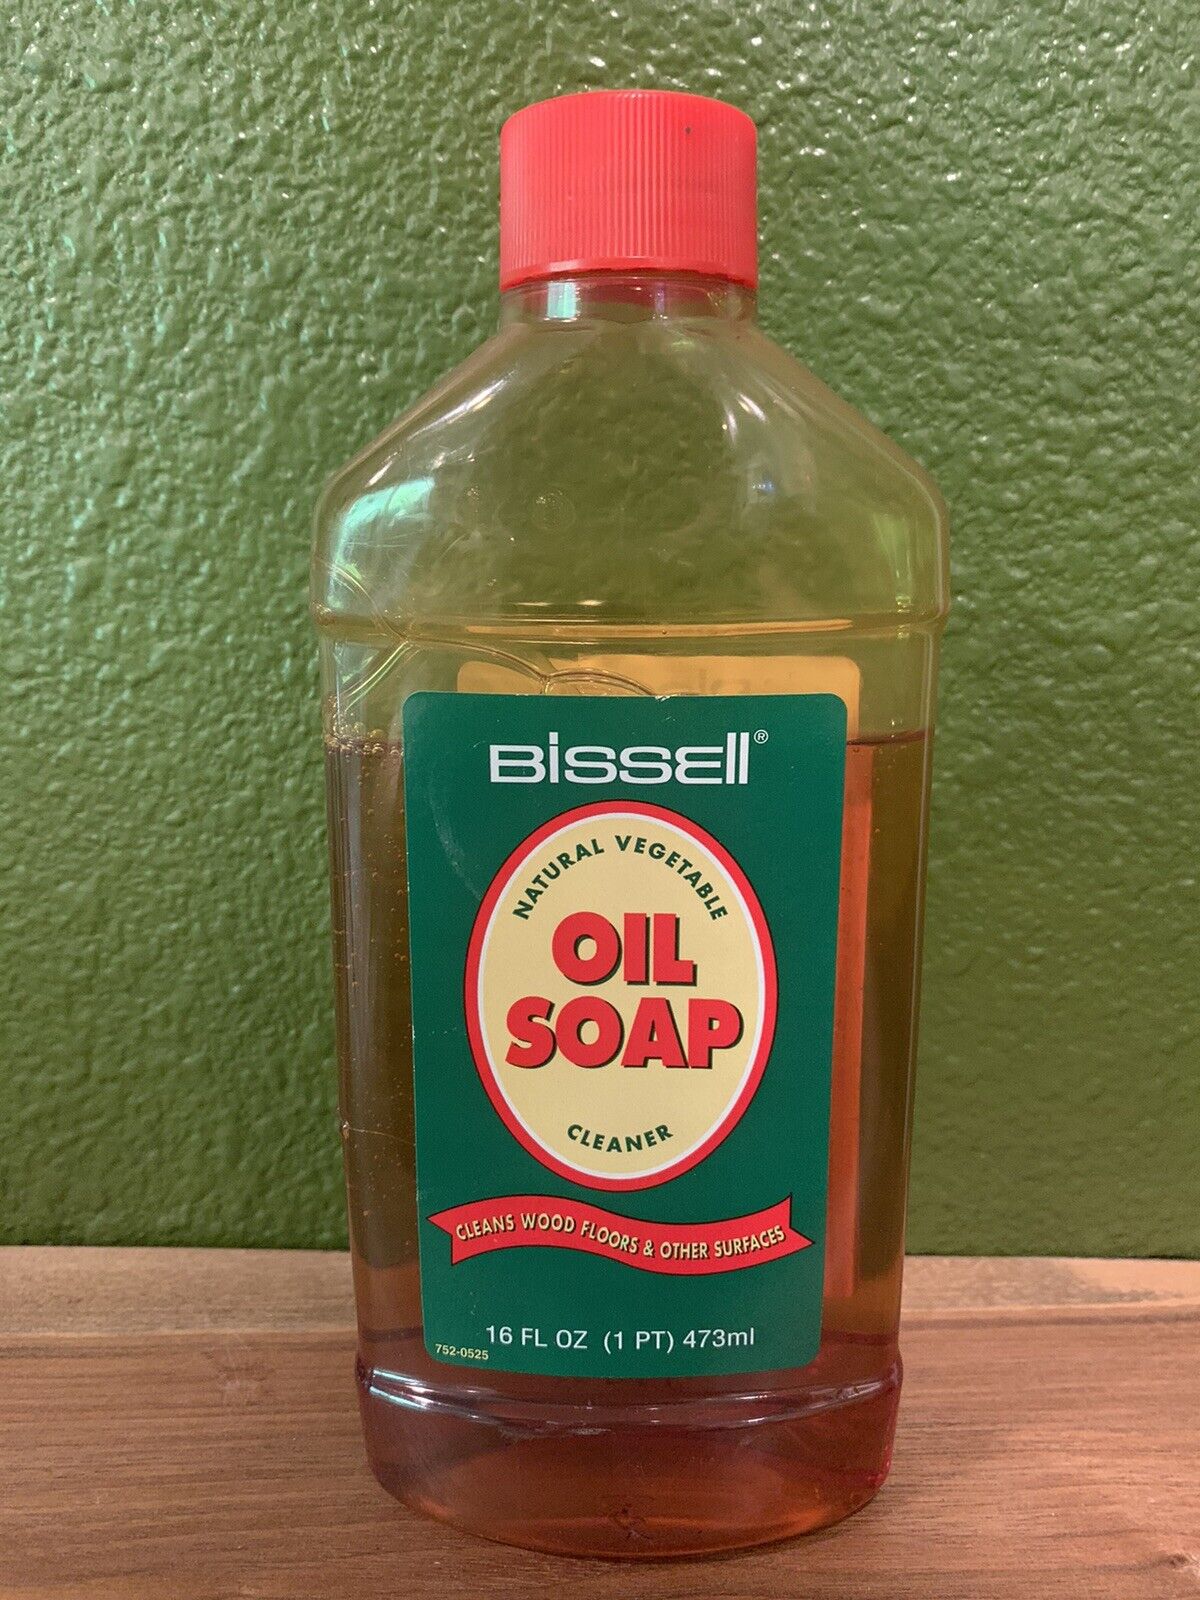 Bissell Vintage Oil Soap Discontinued 